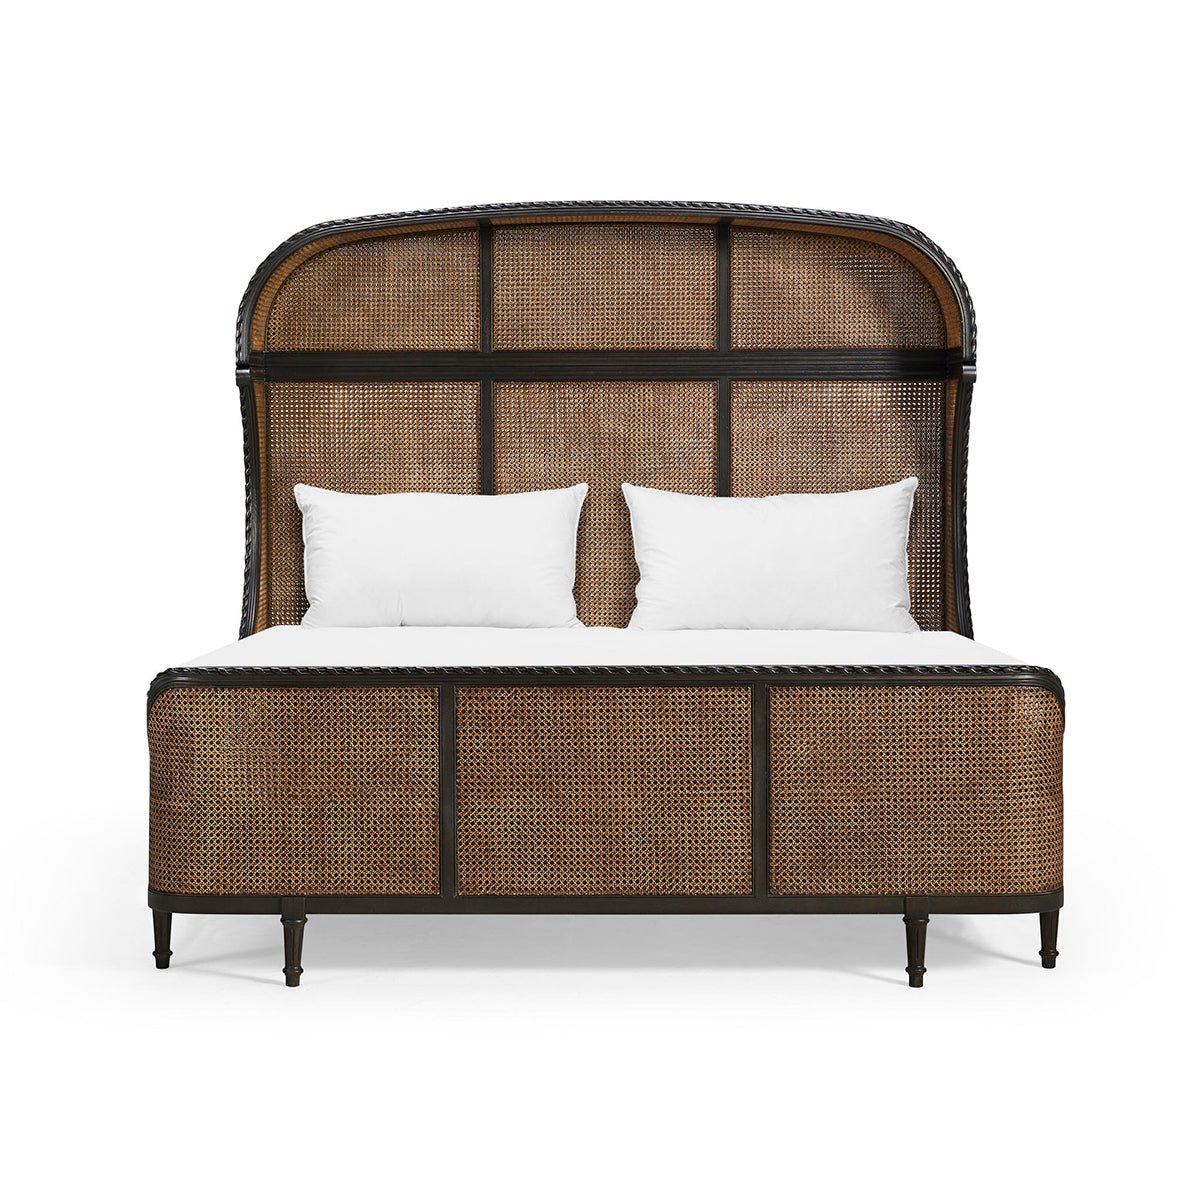 French Caned King Bed - English Georgian America